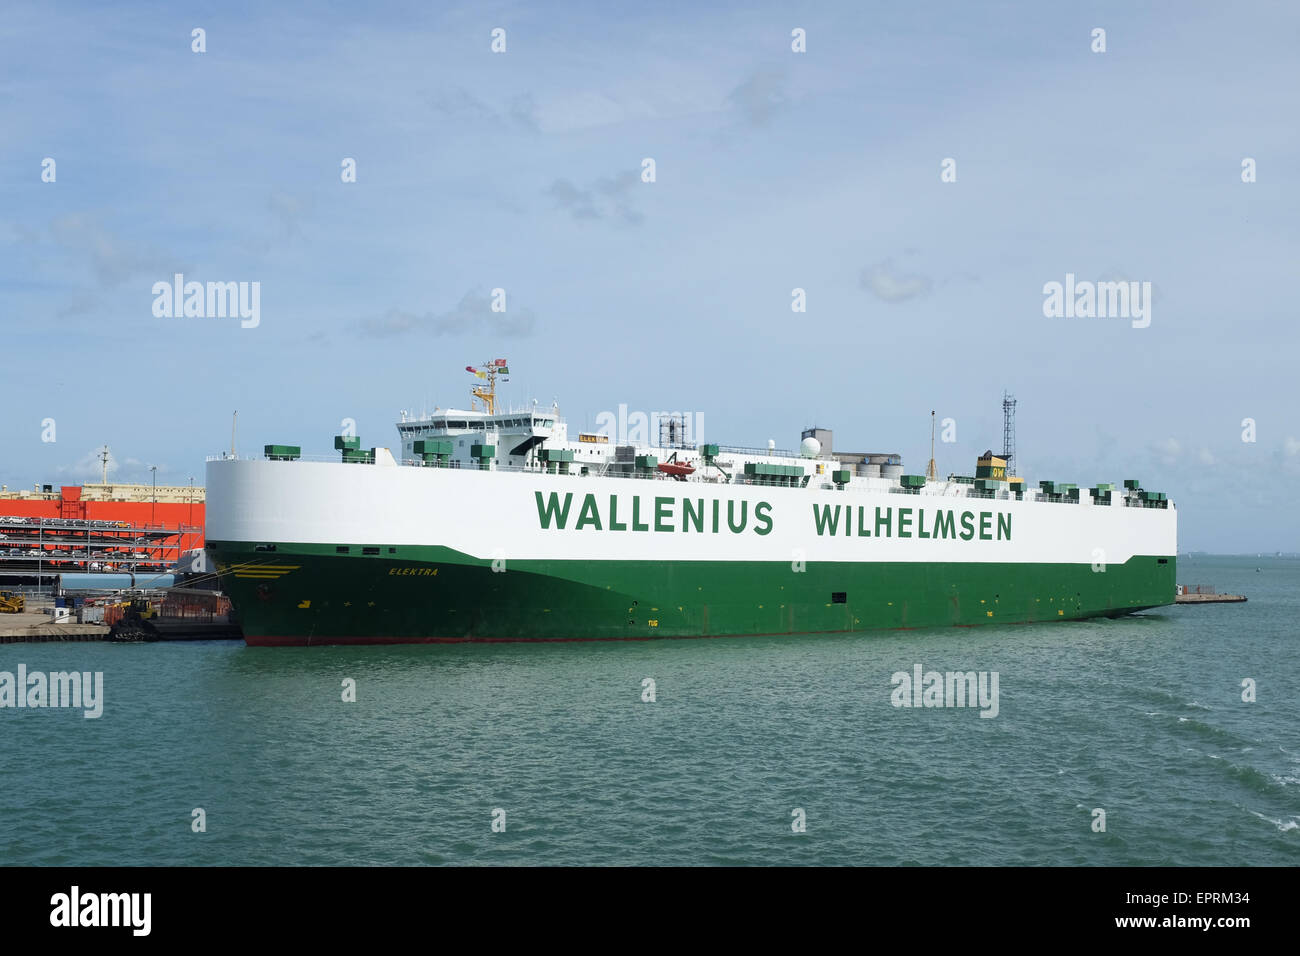 A ship operated by Wallenius Wilhelmsen Logistics, docked in Southampton, England. Stock Photo